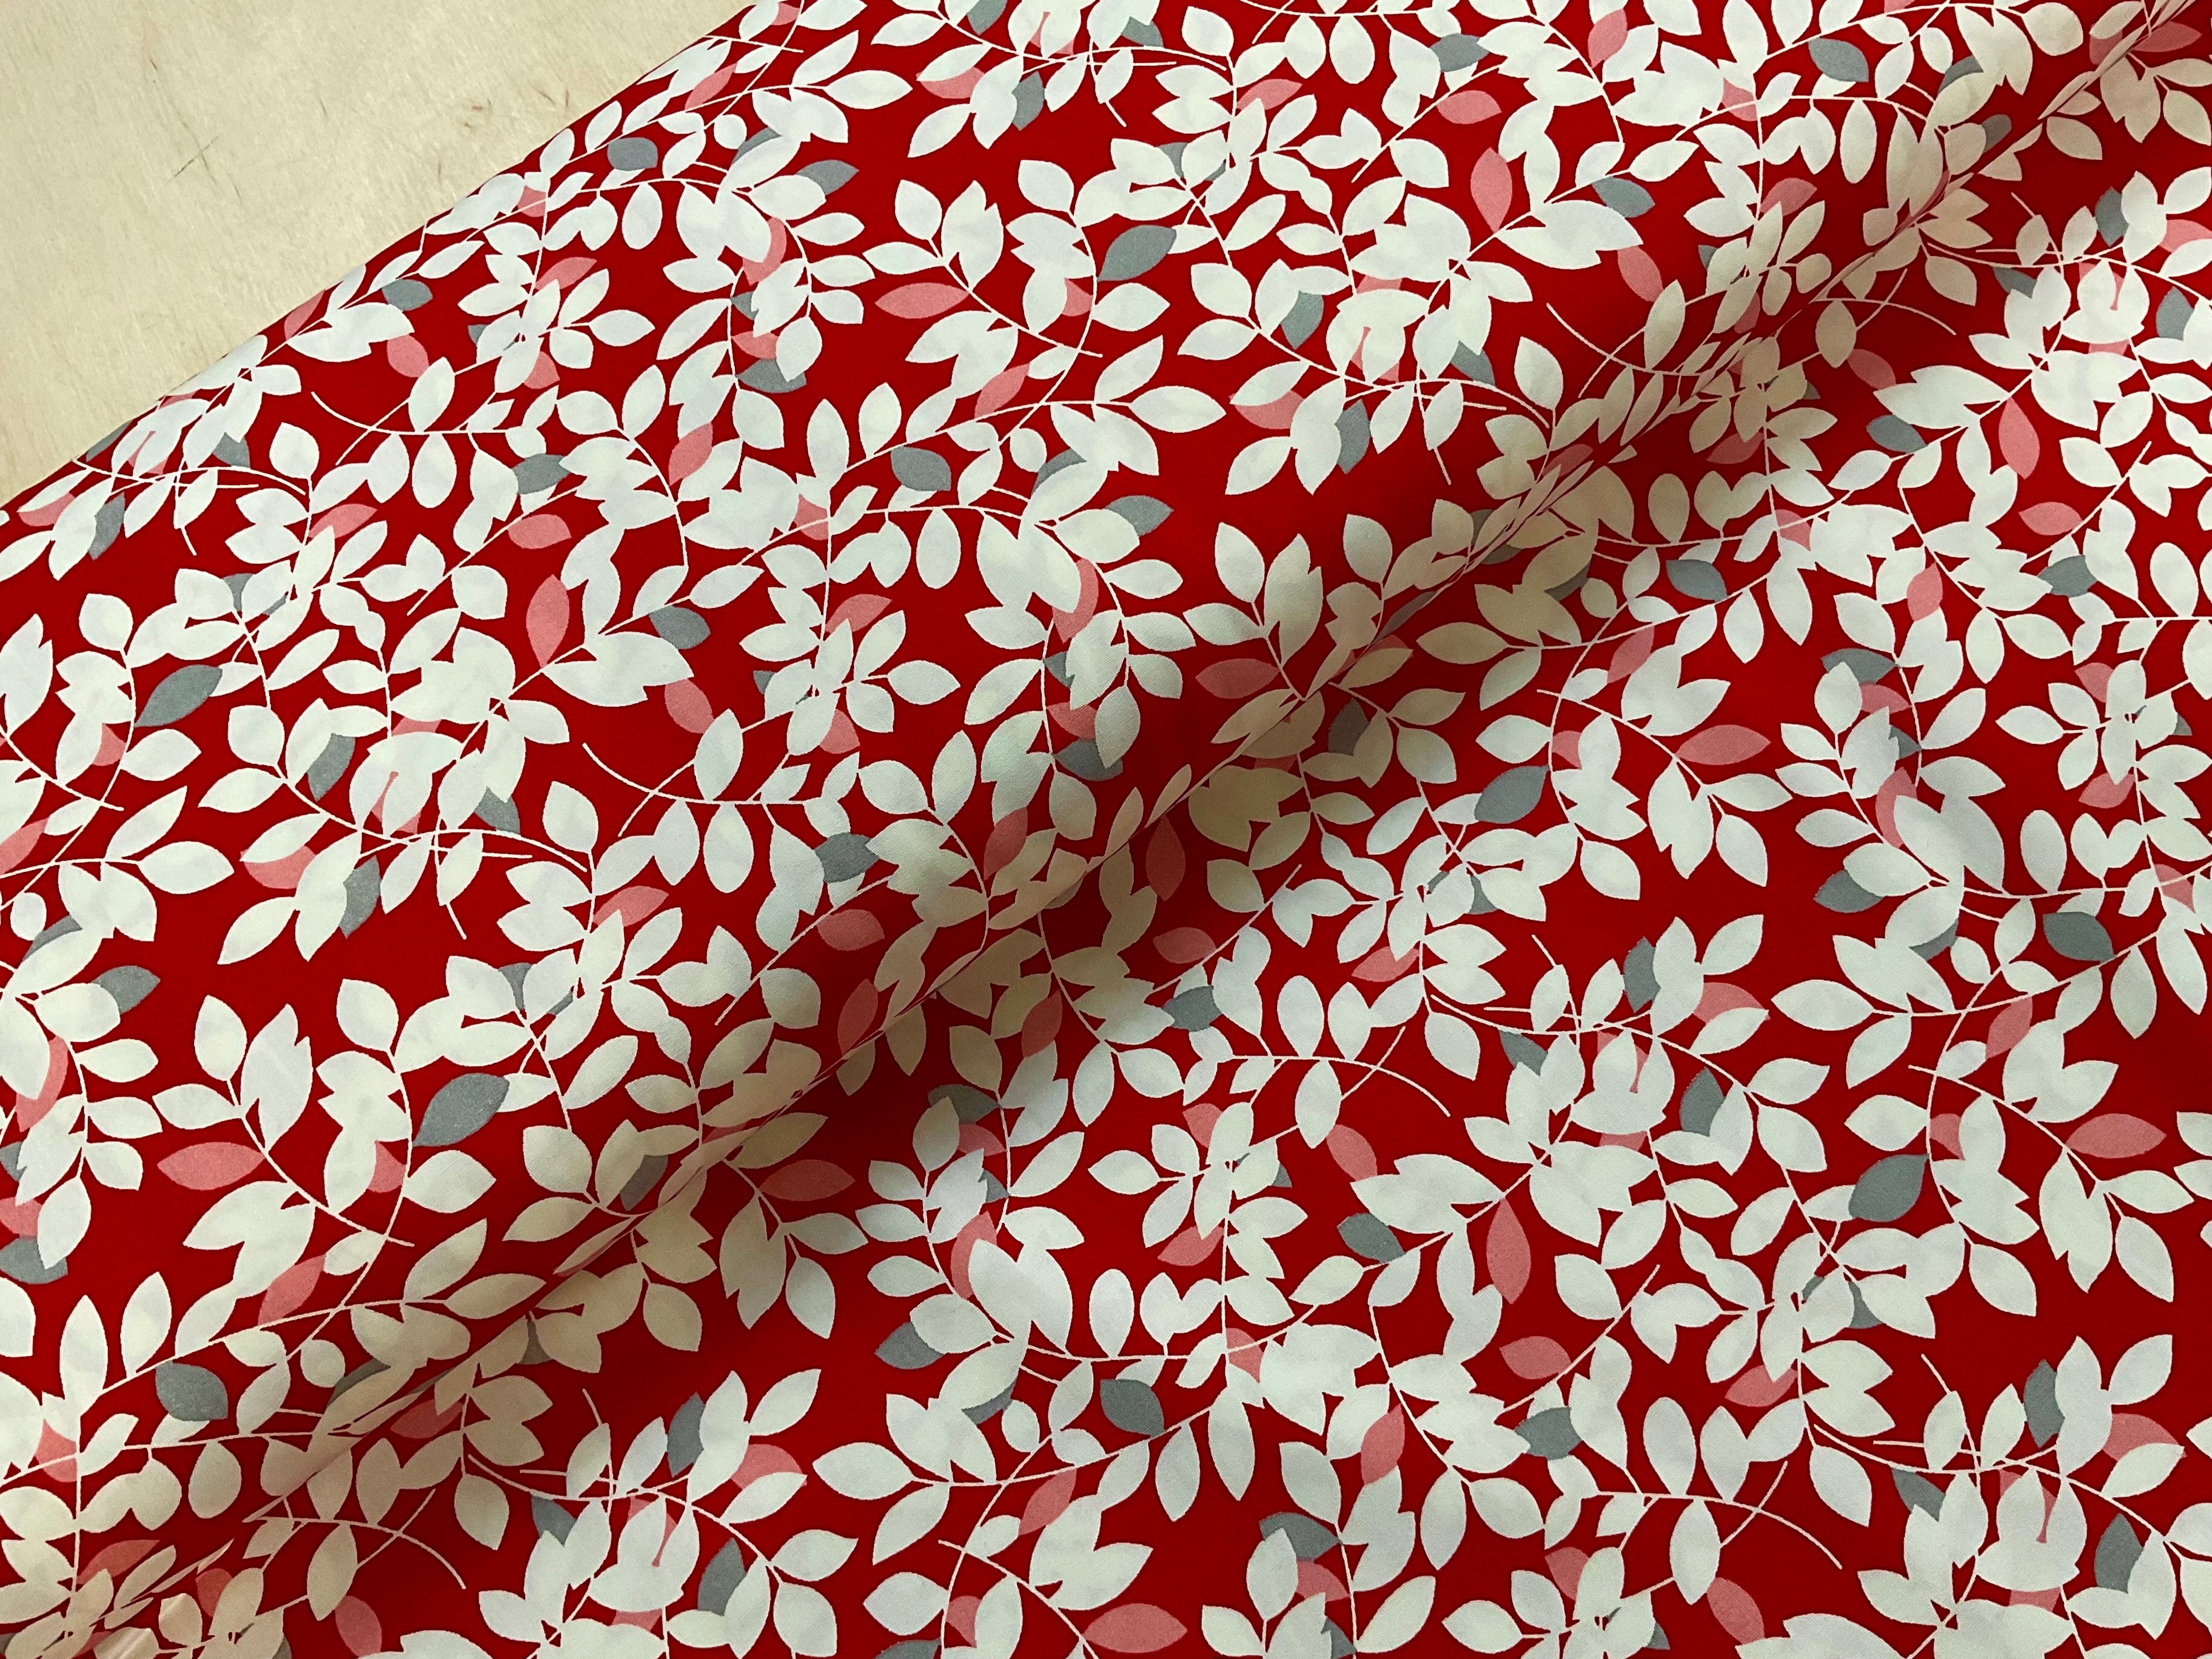 Leaves on Red Cotton Poplin